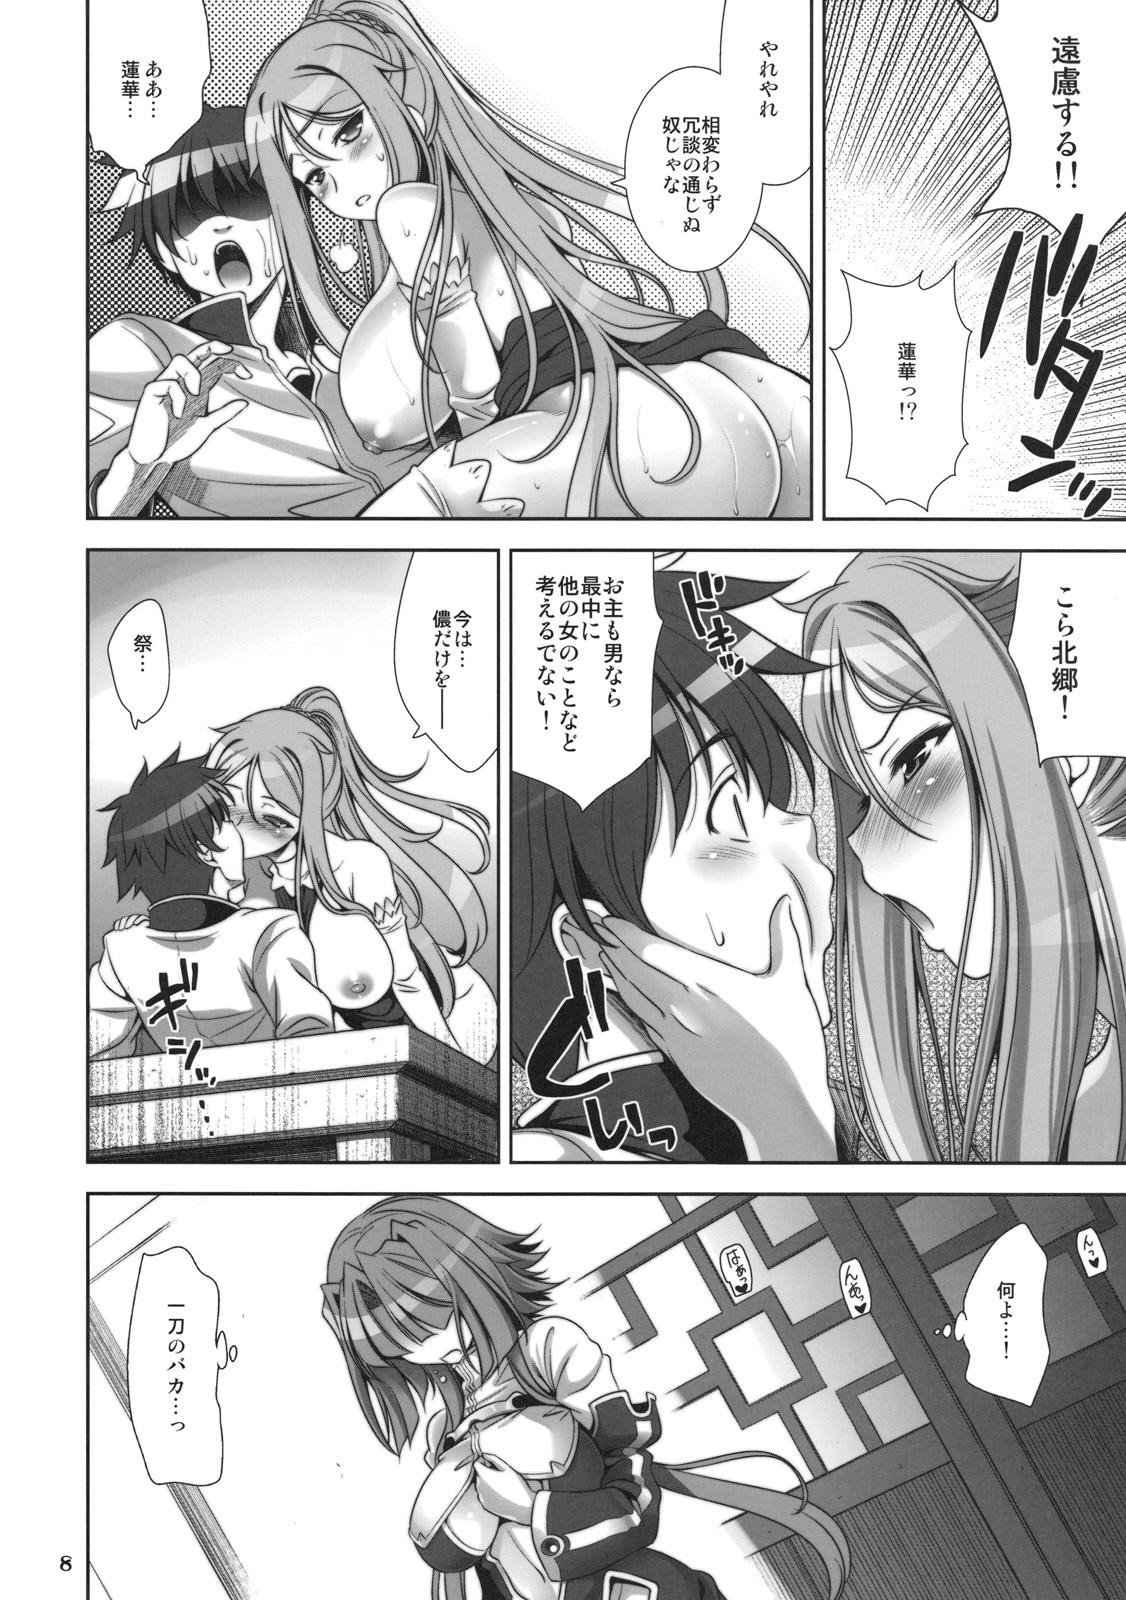 Humiliation Go! My Way - Koihime musou Whipping - Page 7